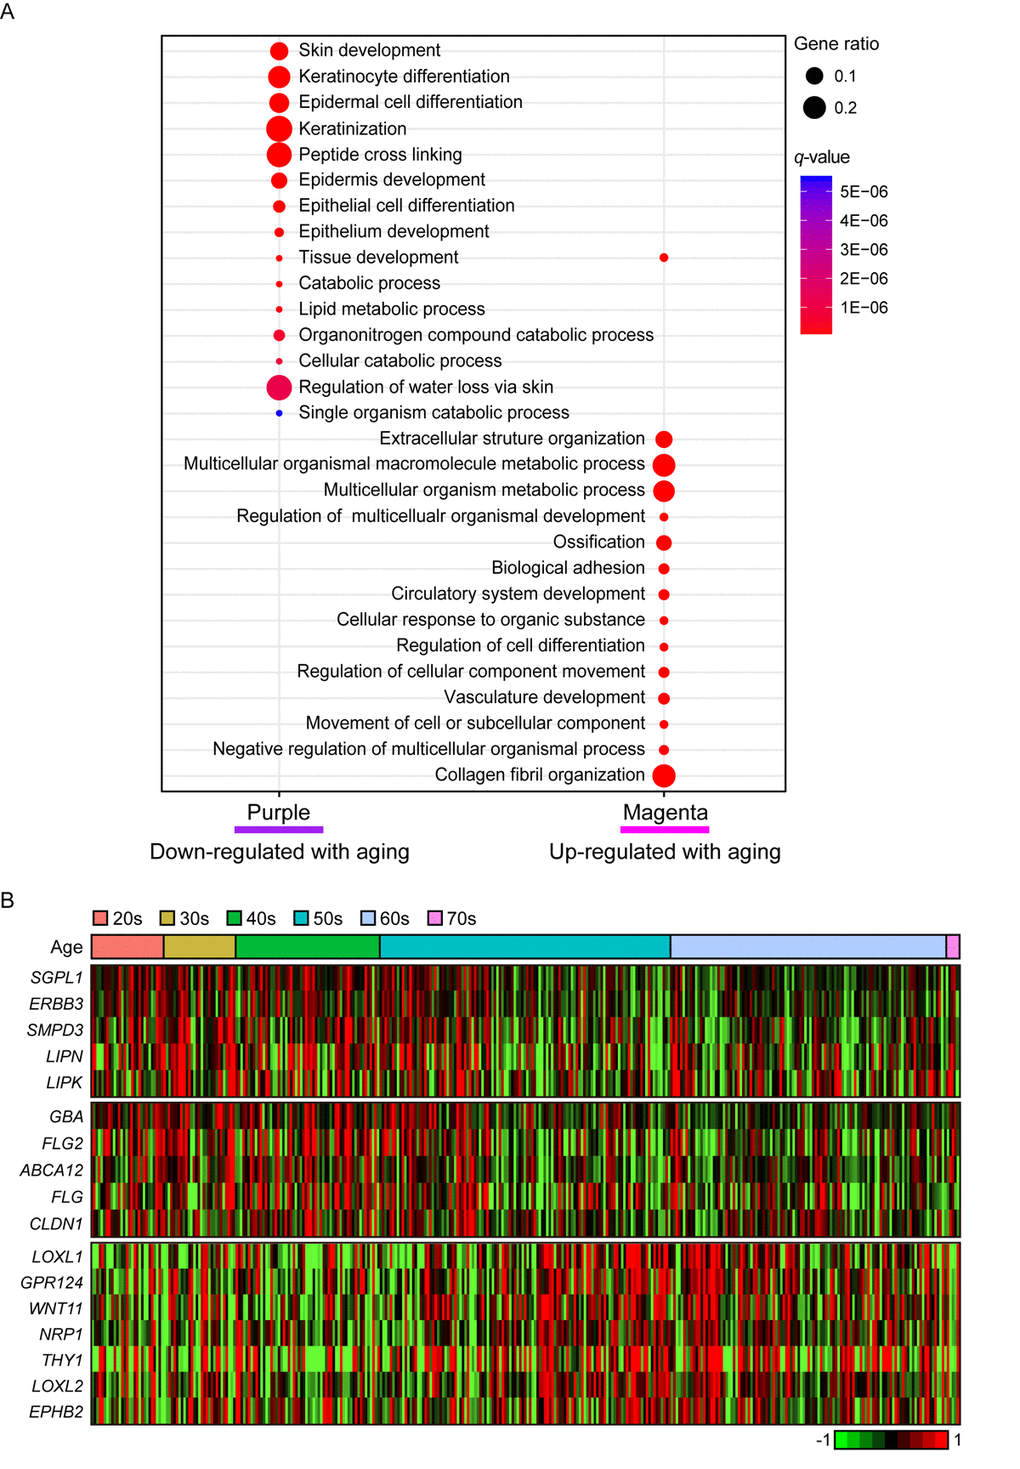 The gene expression alterations that are specific to lower leg. (A) Pathway enrichment analysis of purple and magenta modules. Top 15 the most enriched pathways were used. (B) Heatmap displays the gene expression changes with aging involved in lipid metabolism (top), water loss regulation via skin (middle), and vasculature development (bottom) in lower leg.